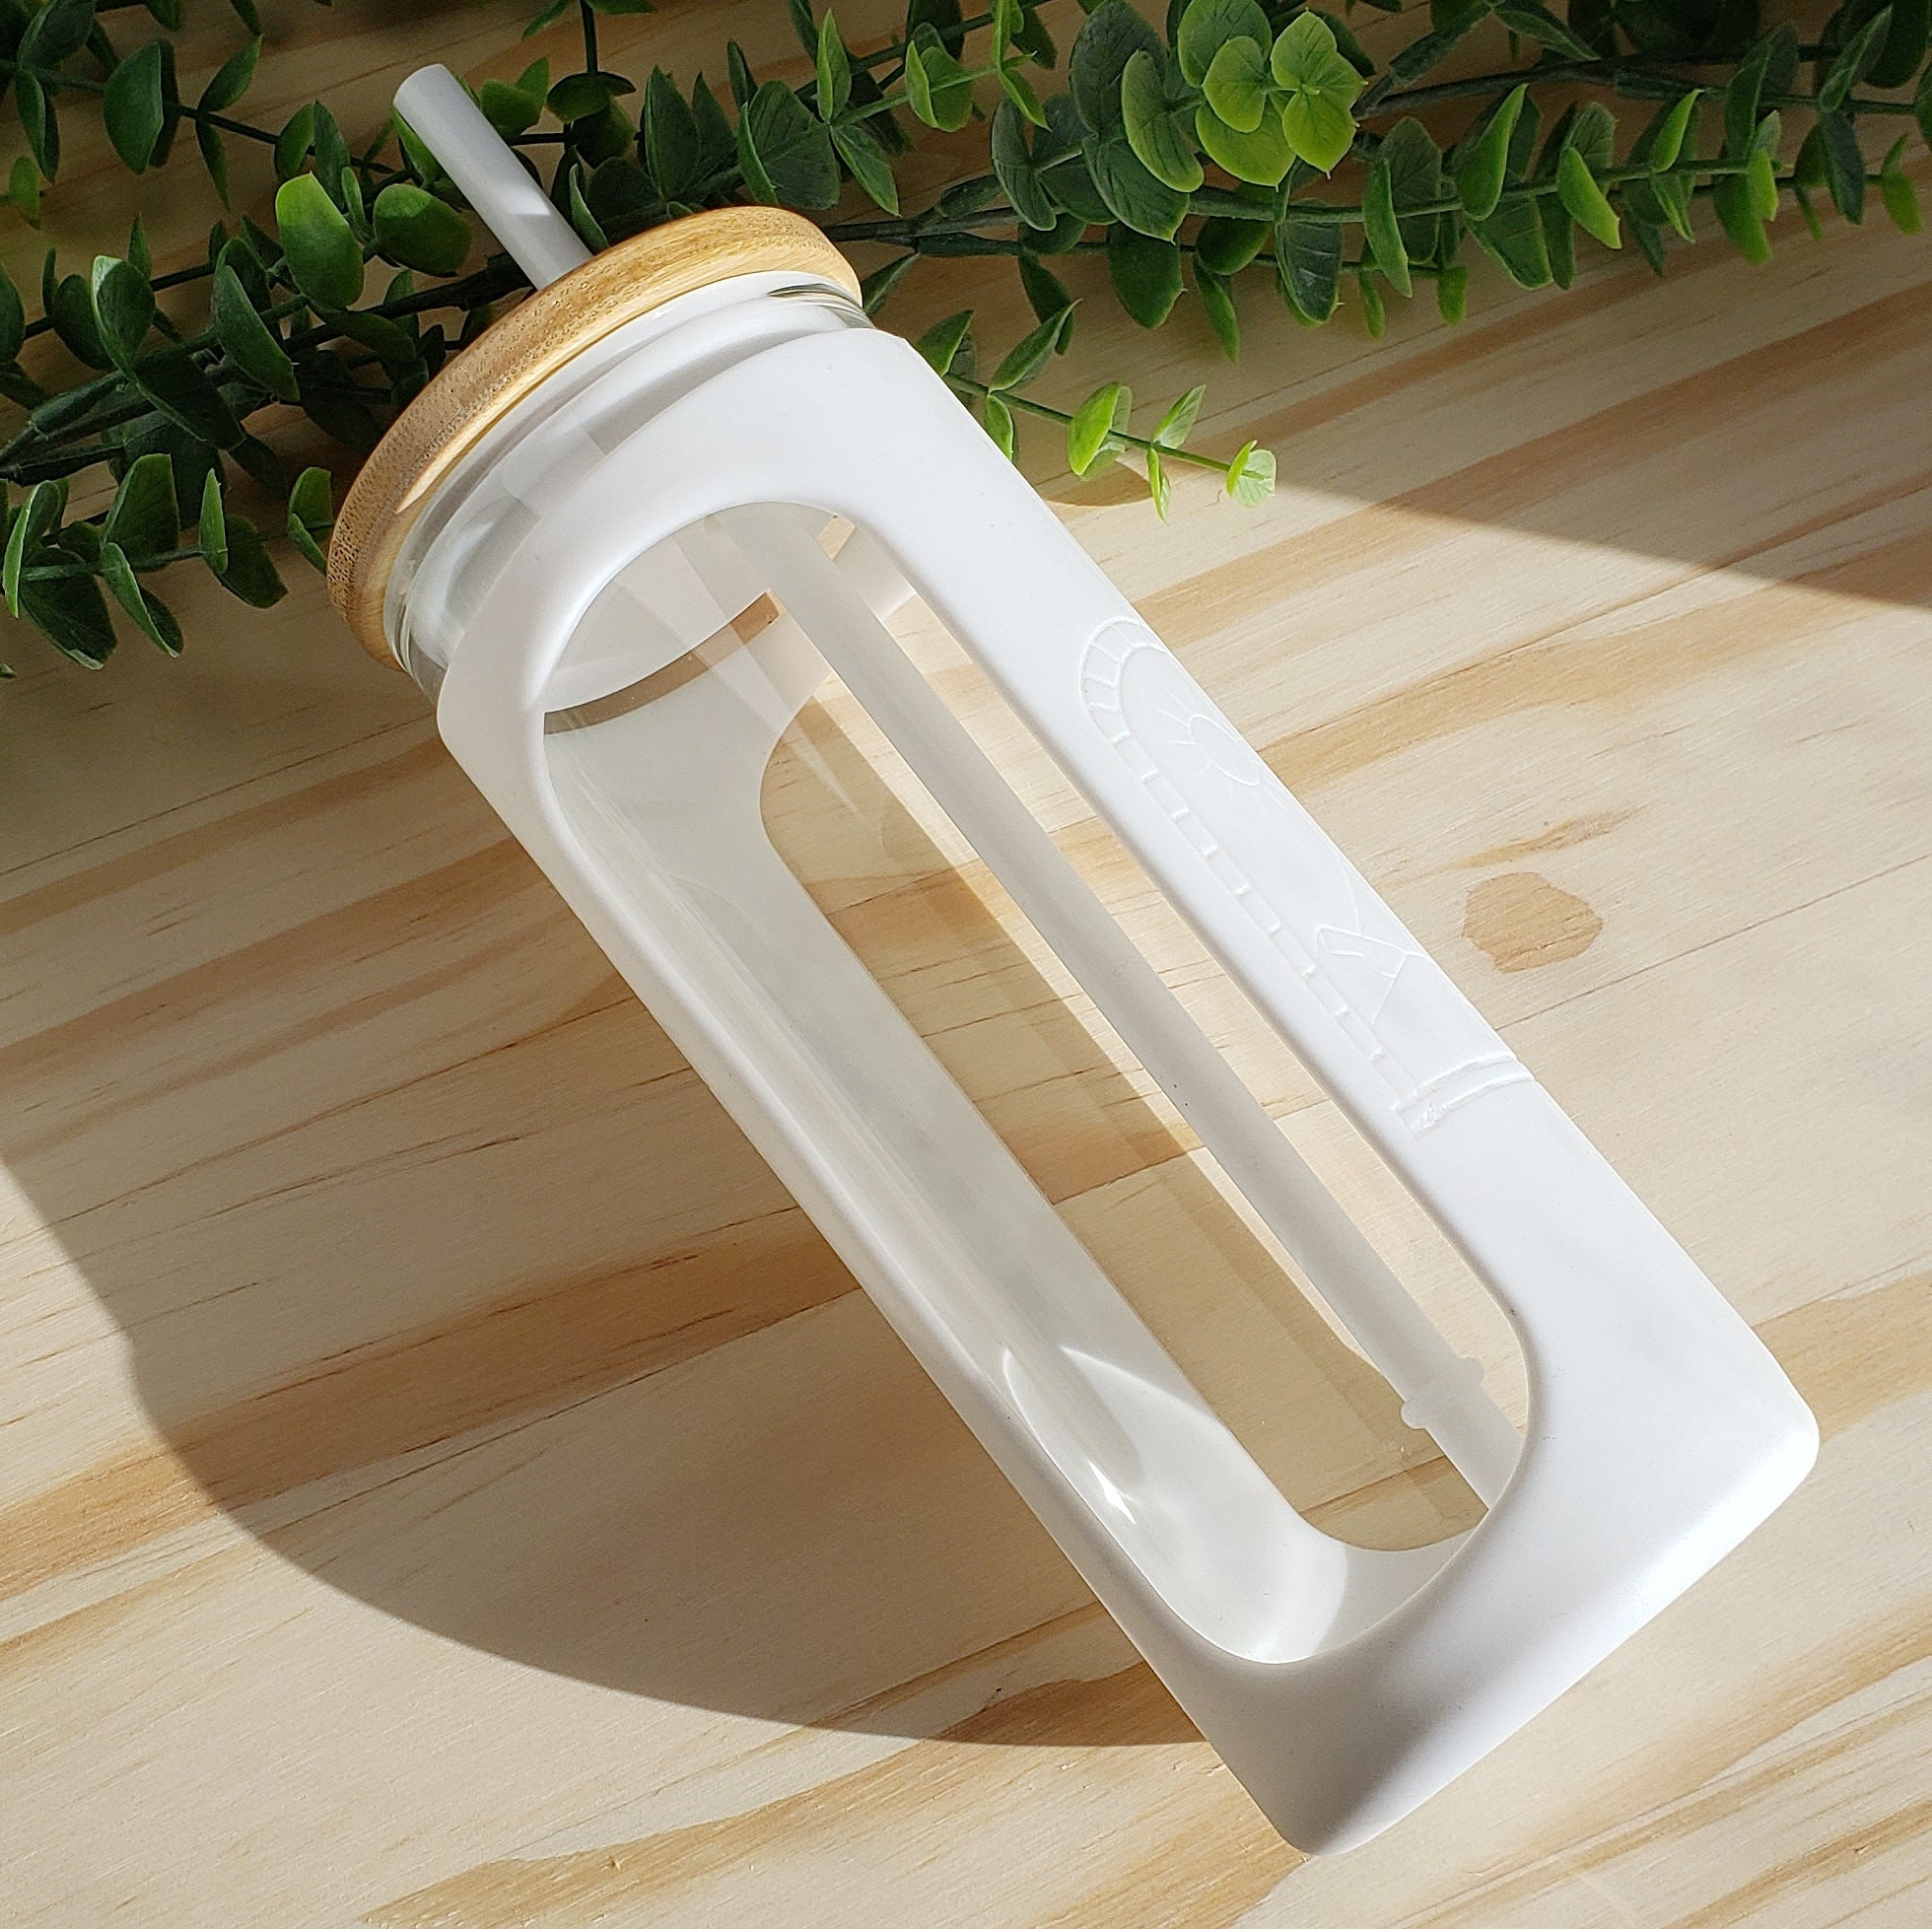 Custom Glass Water Bottle With Rubber Grip Suppliers and